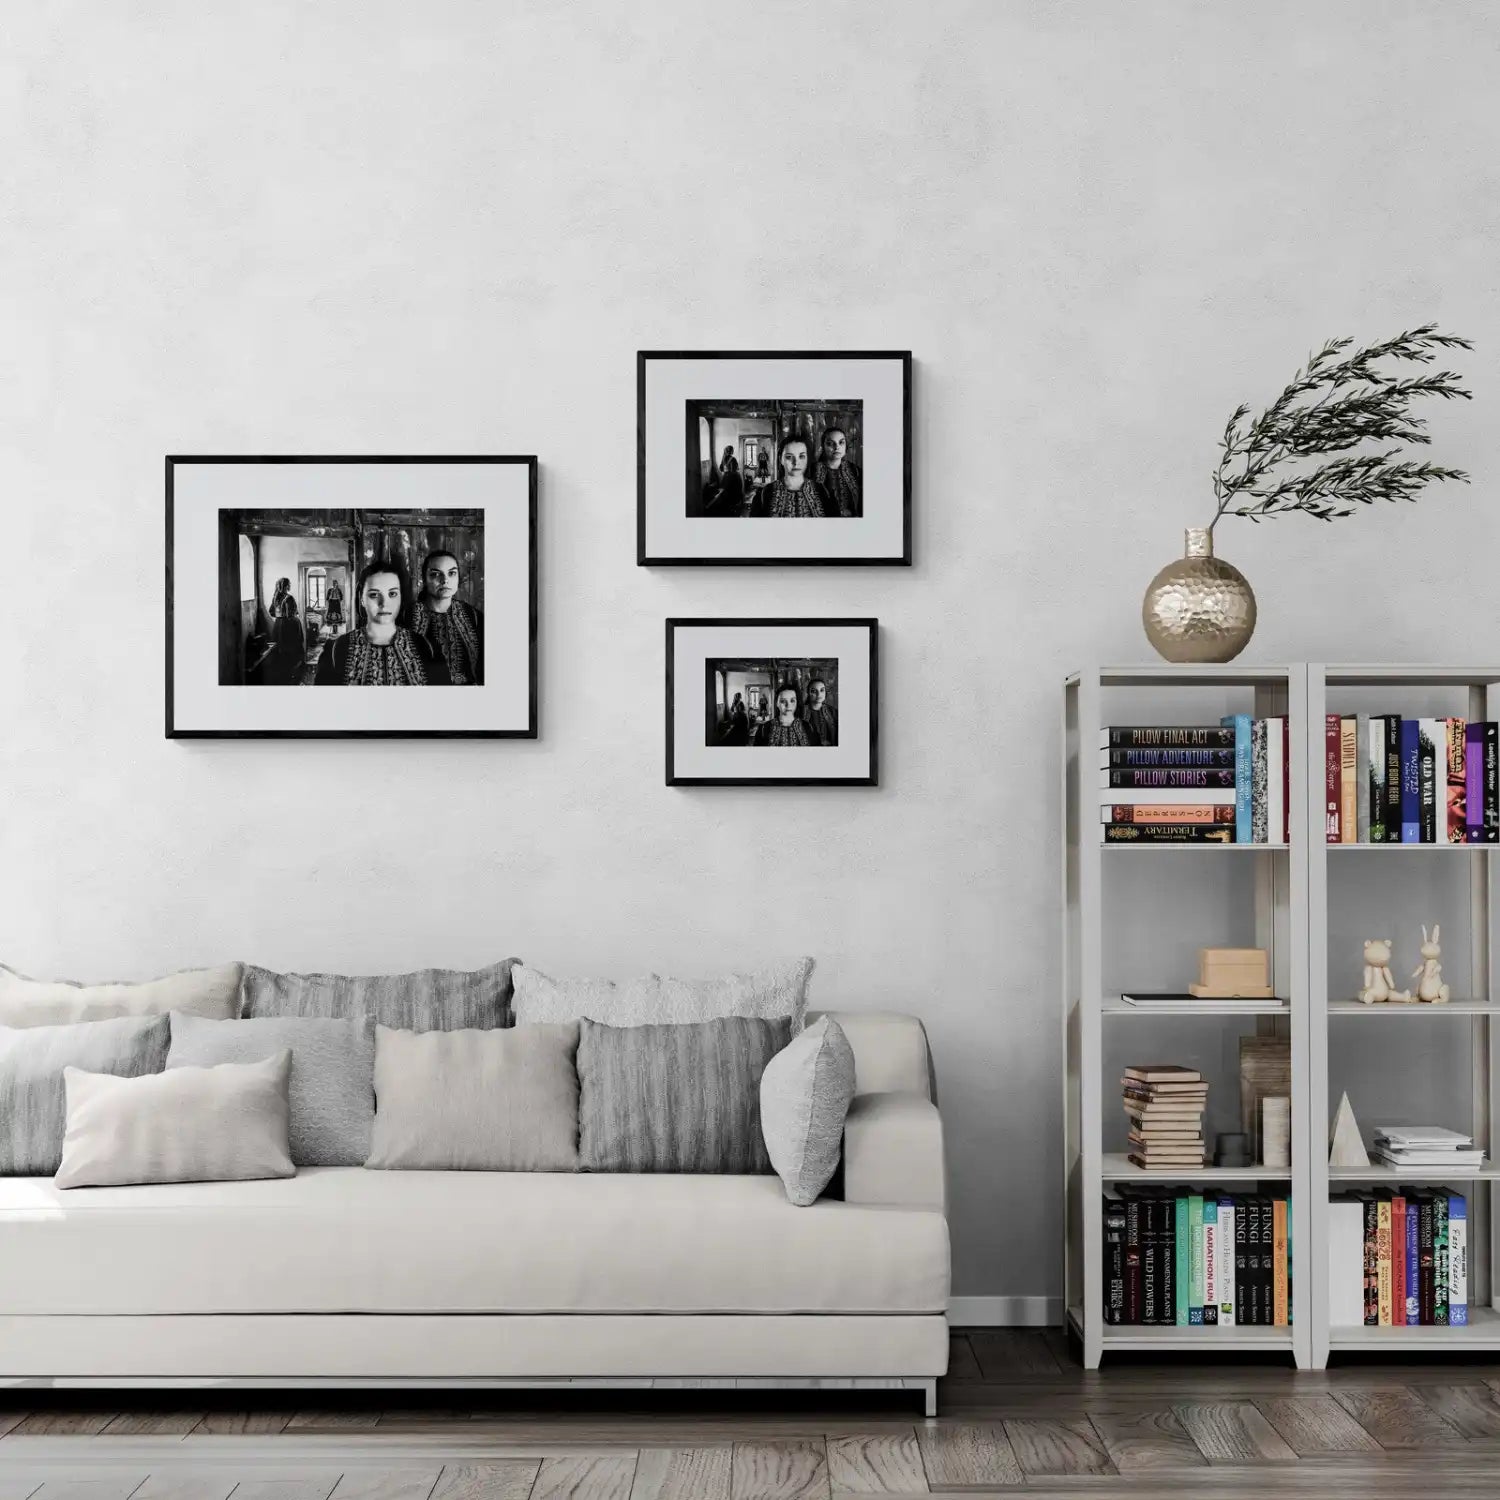 Filiates, Thesprotia, Epirus, Greece | In an Old House | Black-and-White Wall Art Photography - framing options